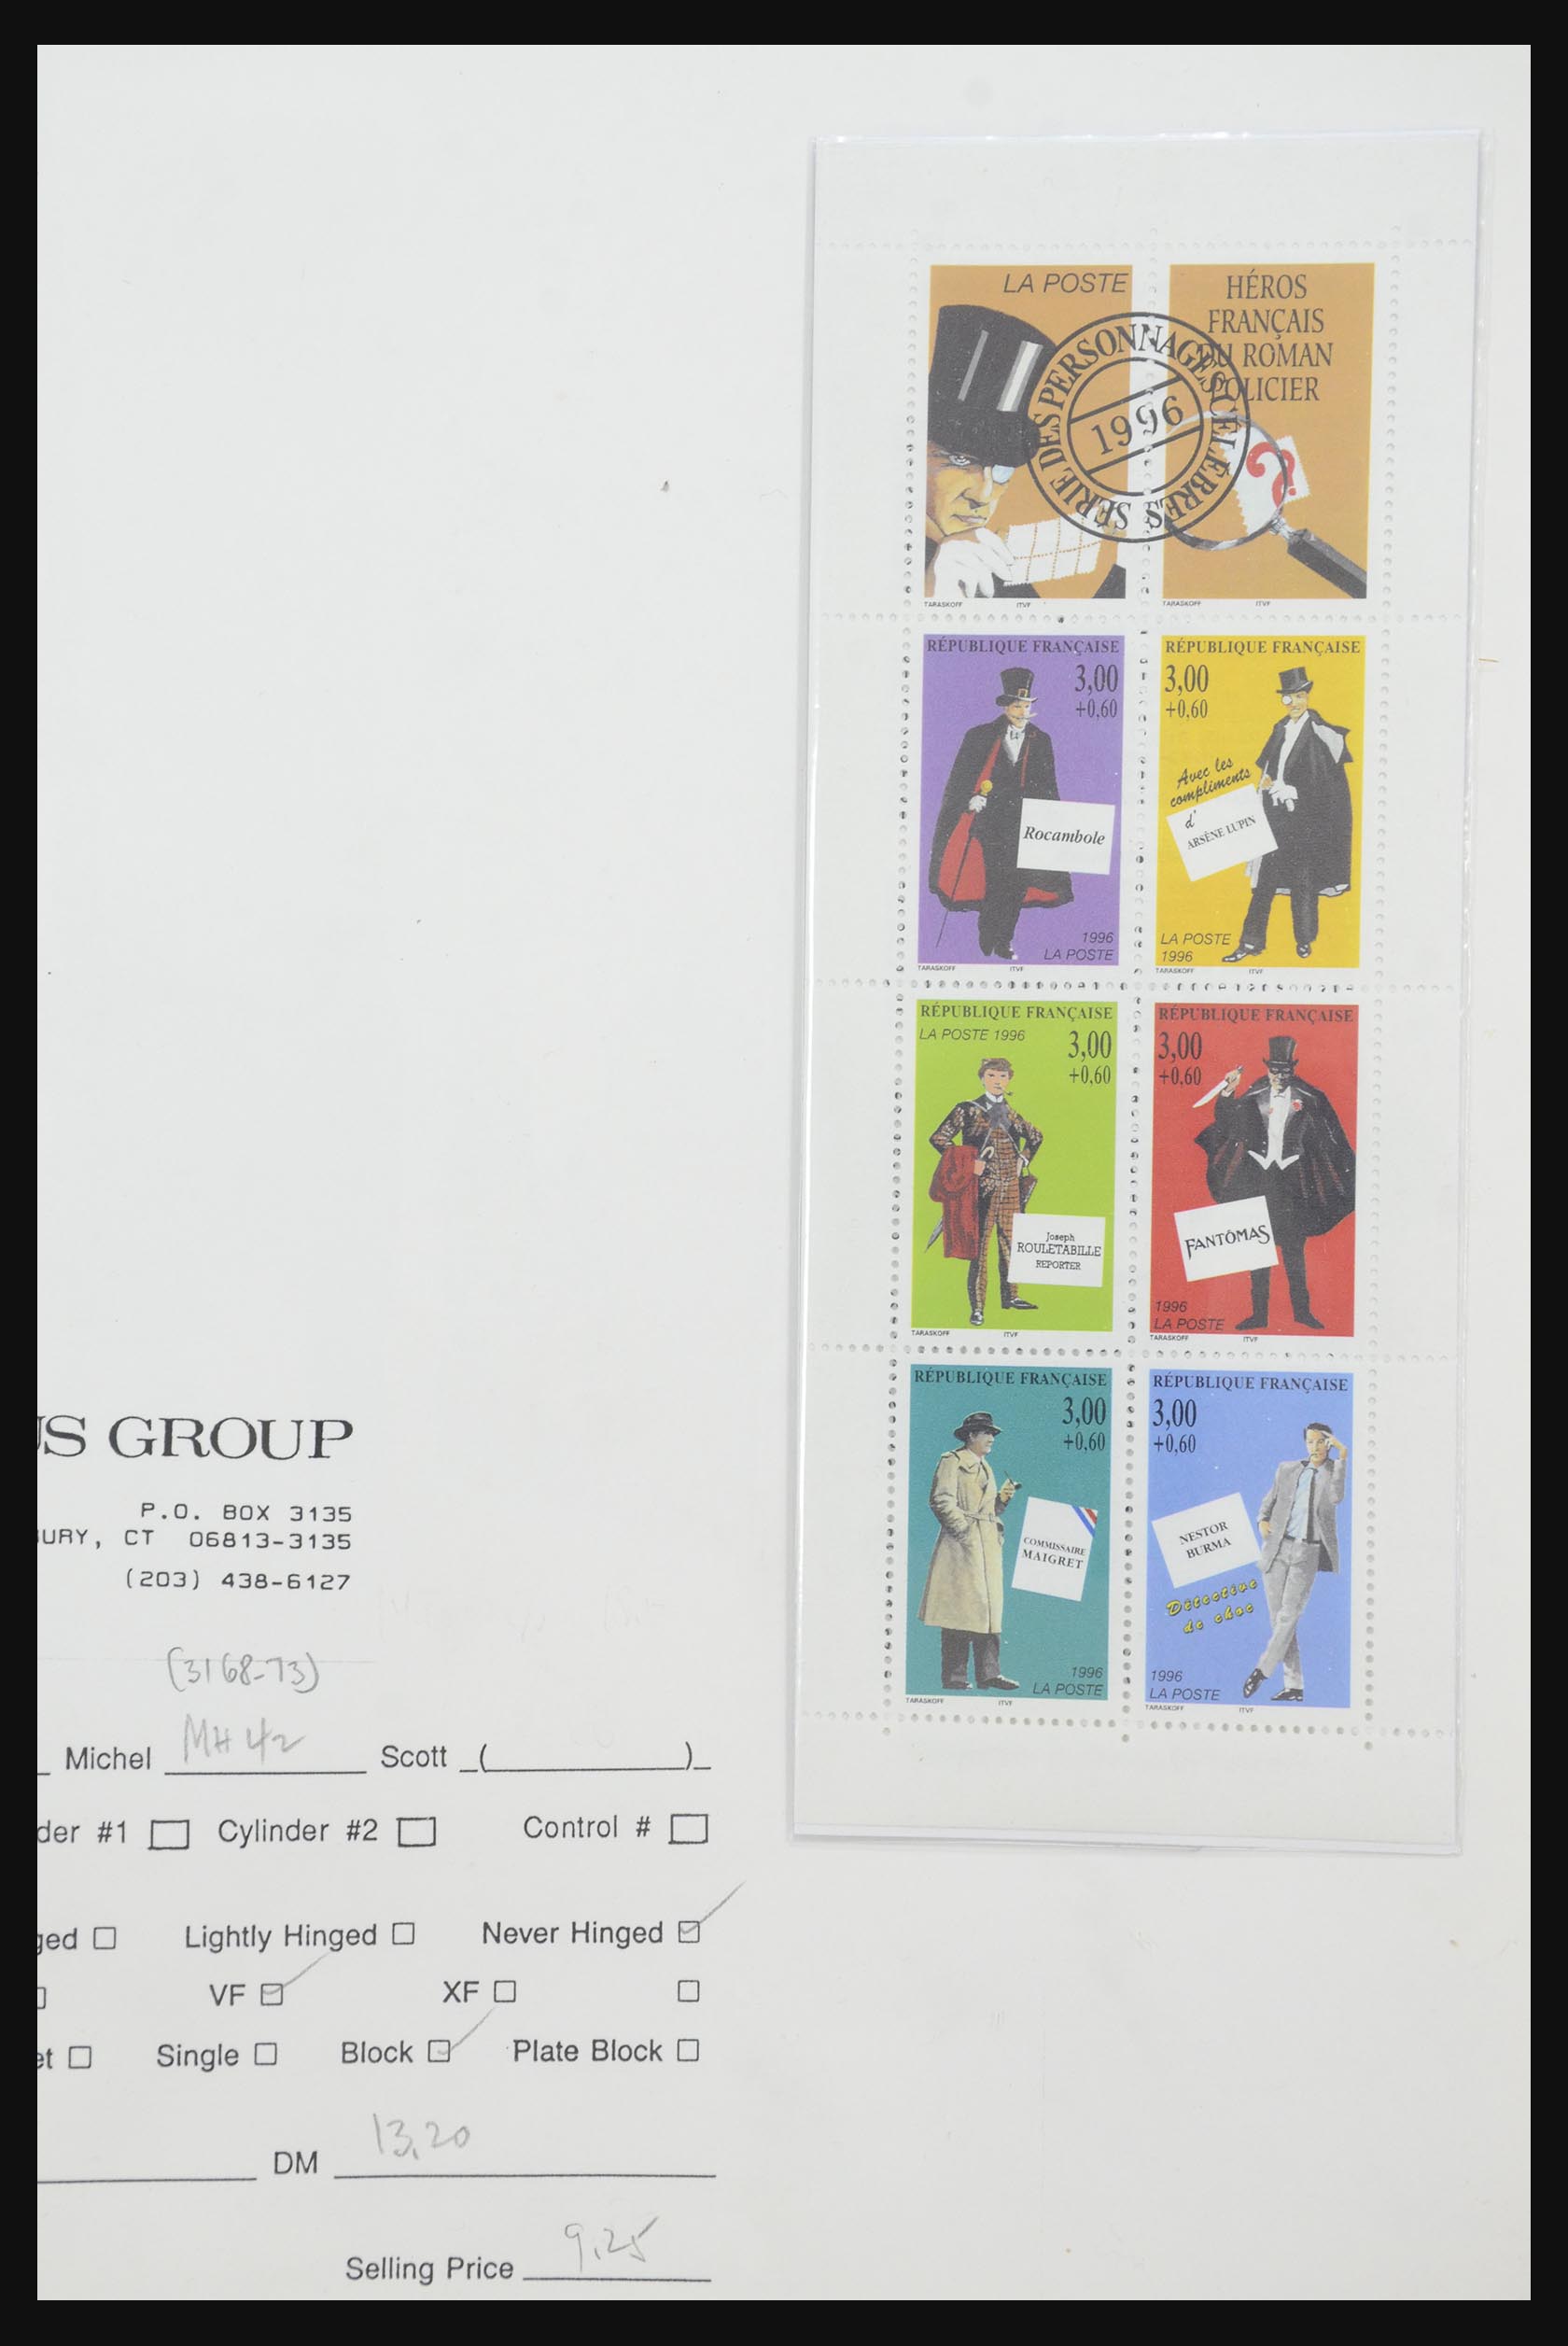 31915 062 - 31915 Western Europe souvenir sheets and stamp booklets on FDC.